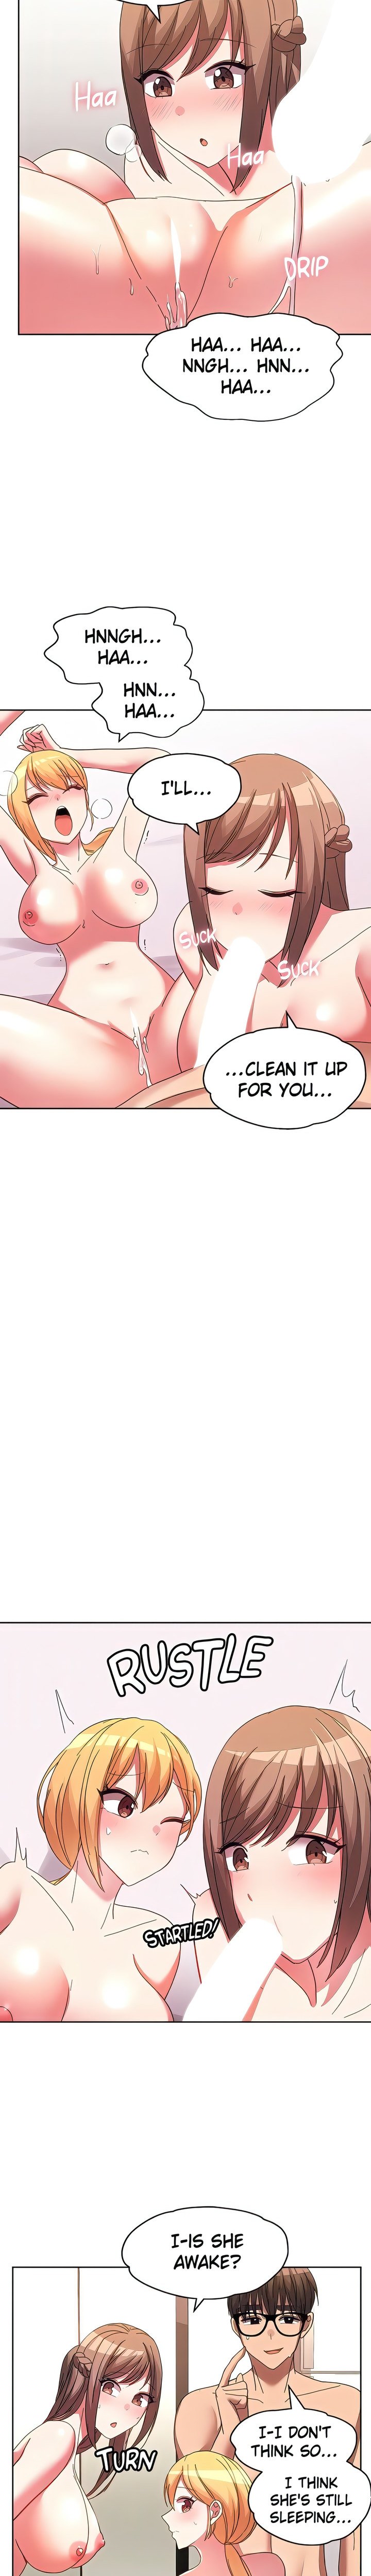 girls-i-used-to-teach-chap-34-11